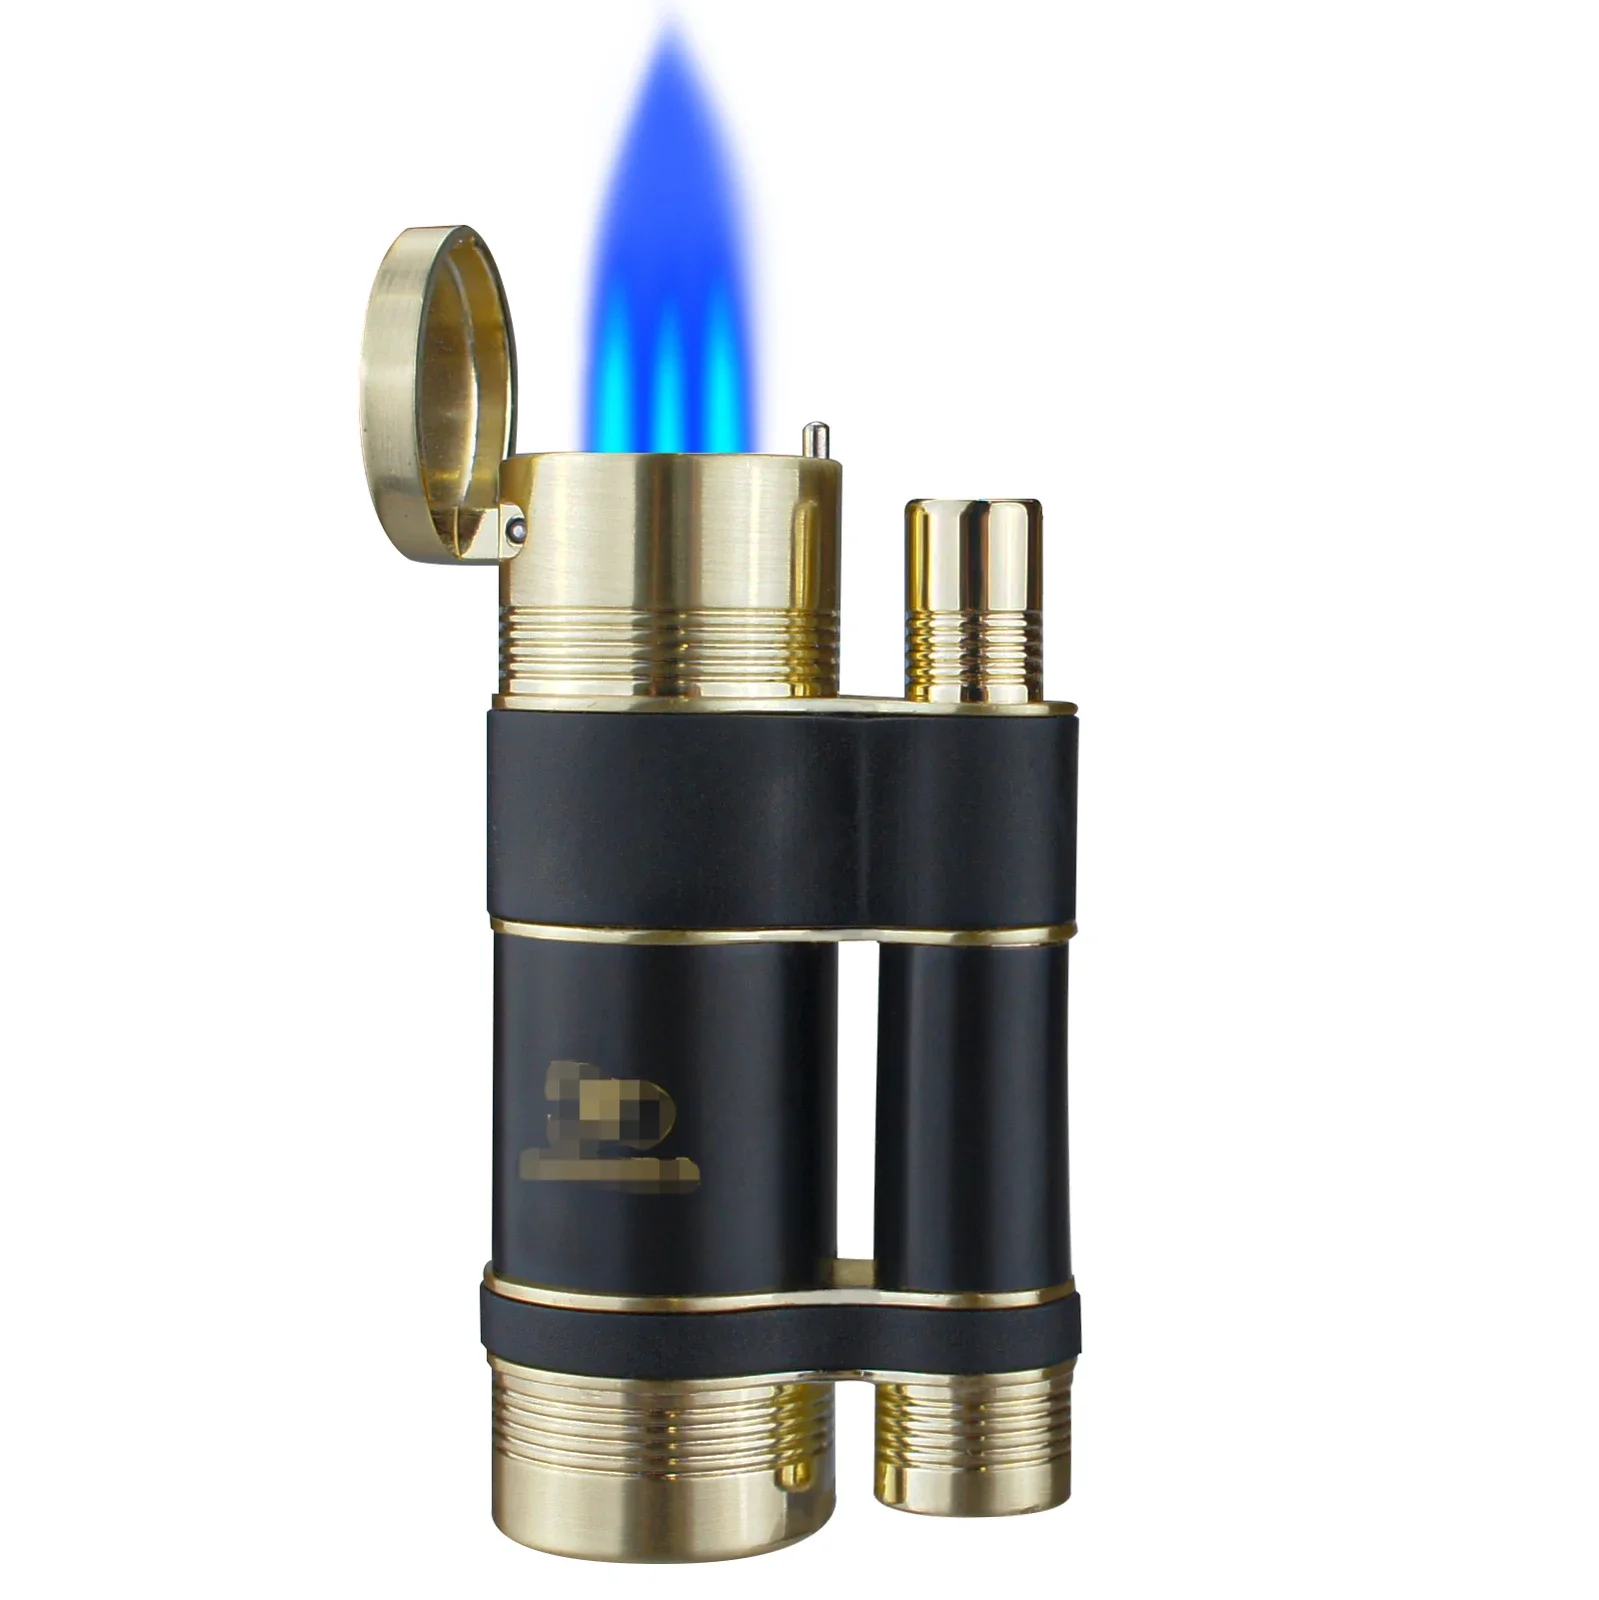 

Metal Cigar Lighter Tobacco Lighter 3 Torch Jet Flame Refillable with Punch Tool for MEN Gift Box Smoking Accessories